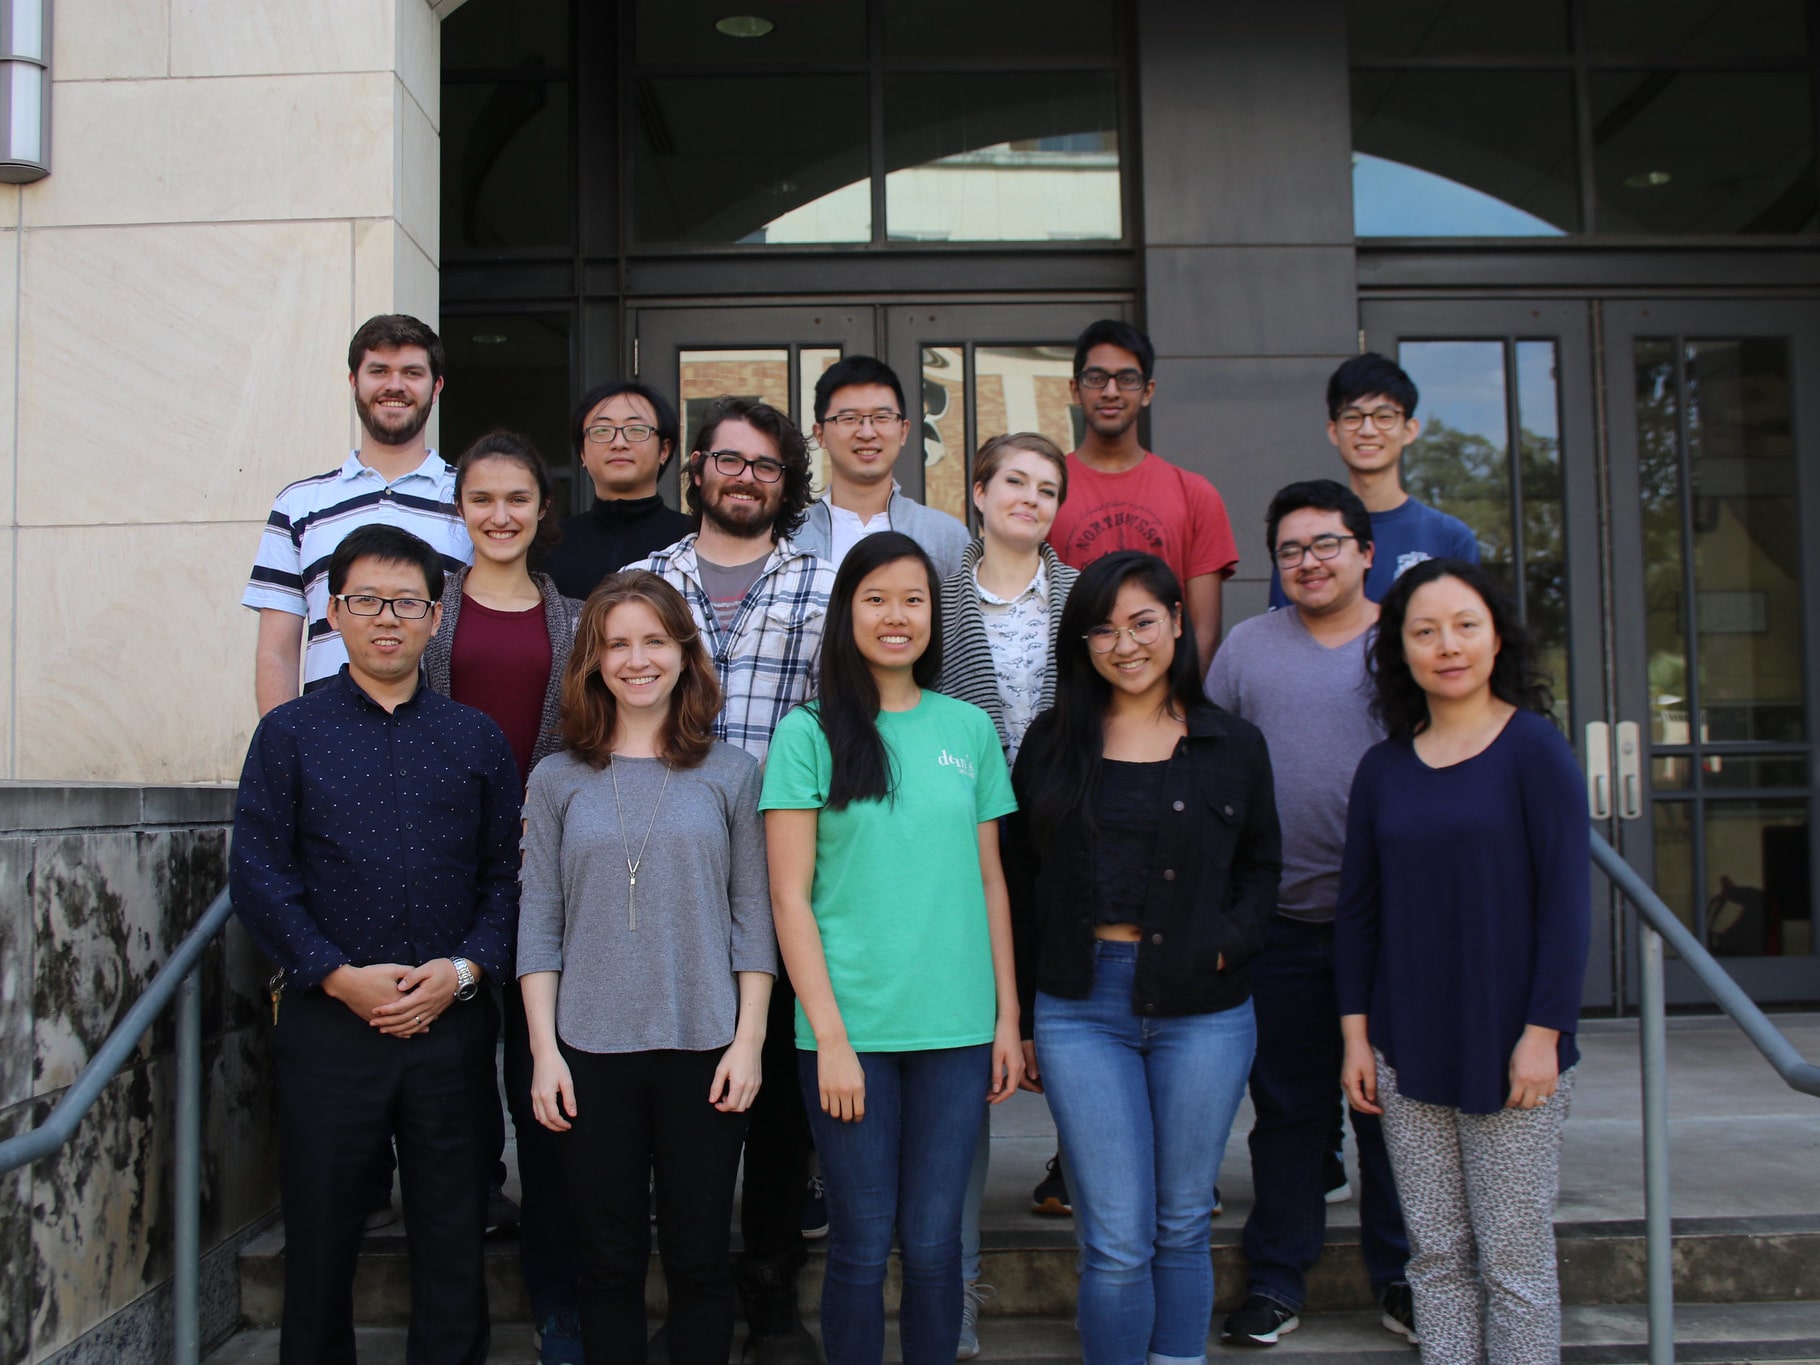 Jenny Jiang's research group on the steps in front of BME building